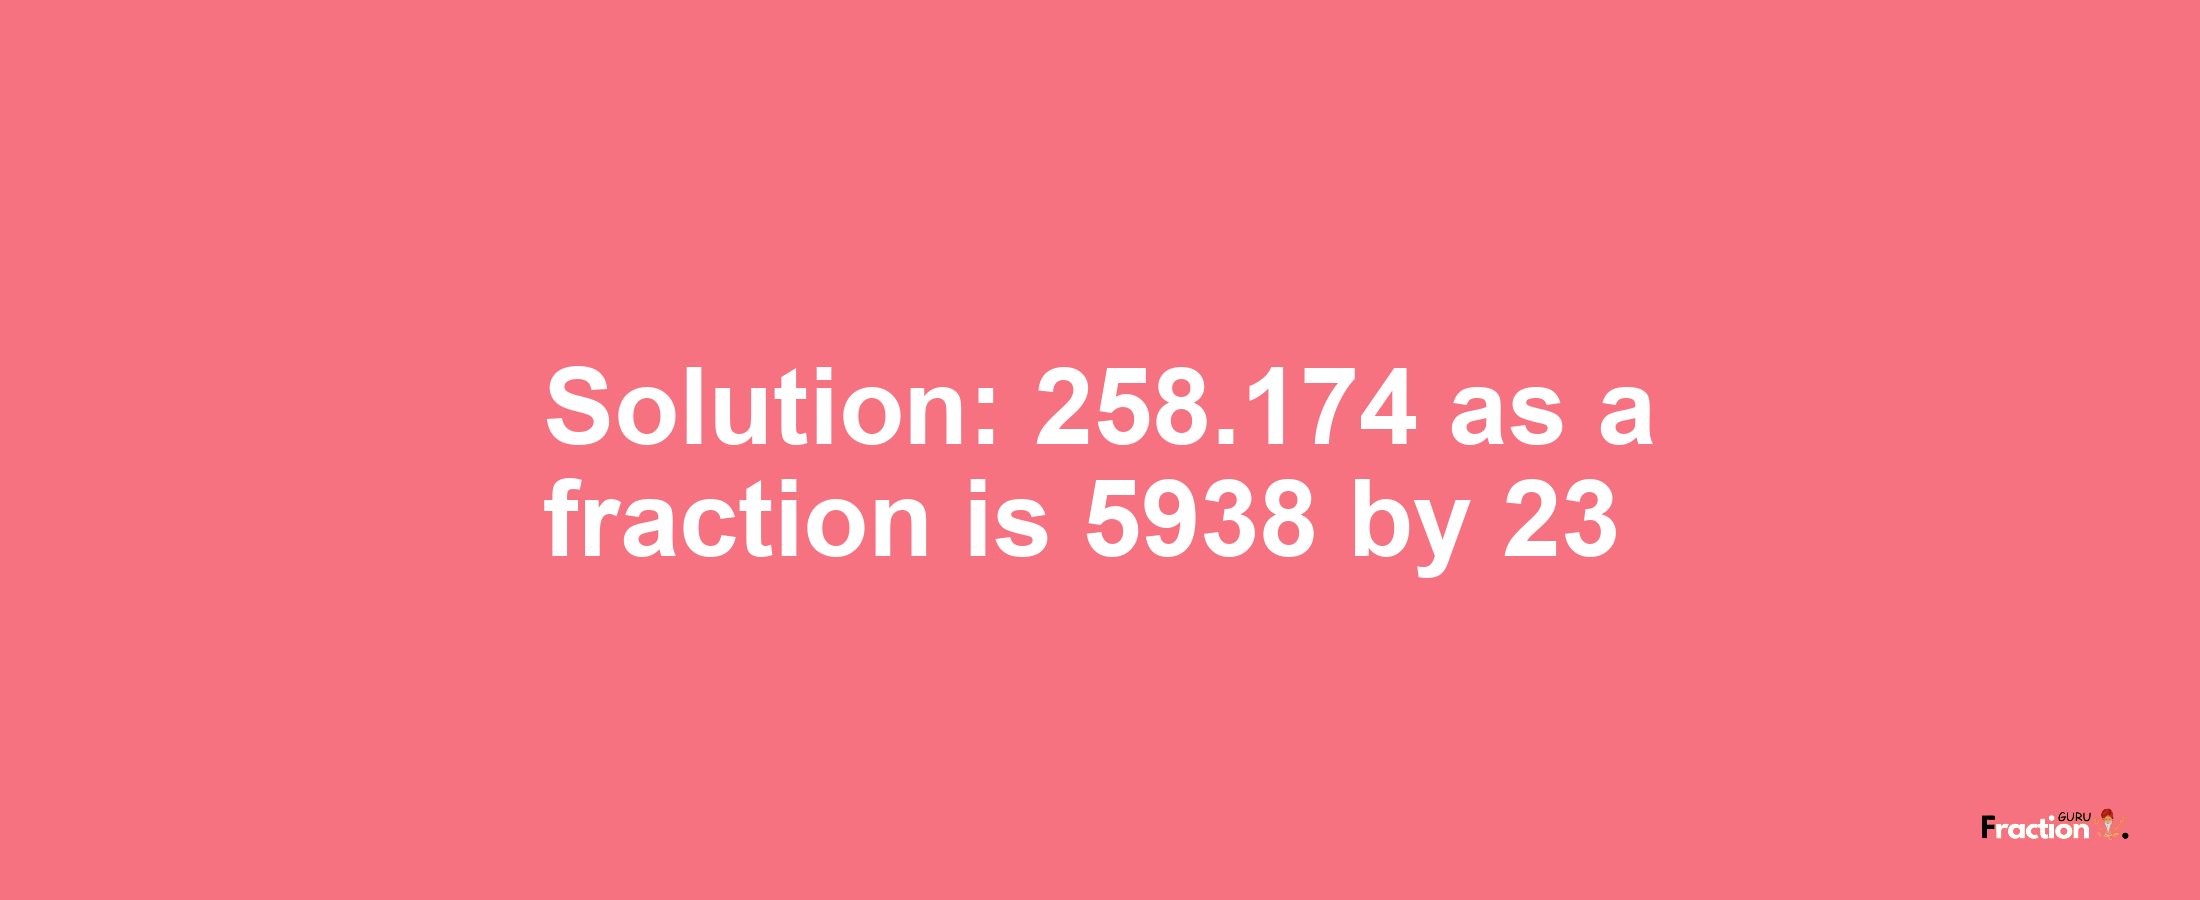 Solution:258.174 as a fraction is 5938/23